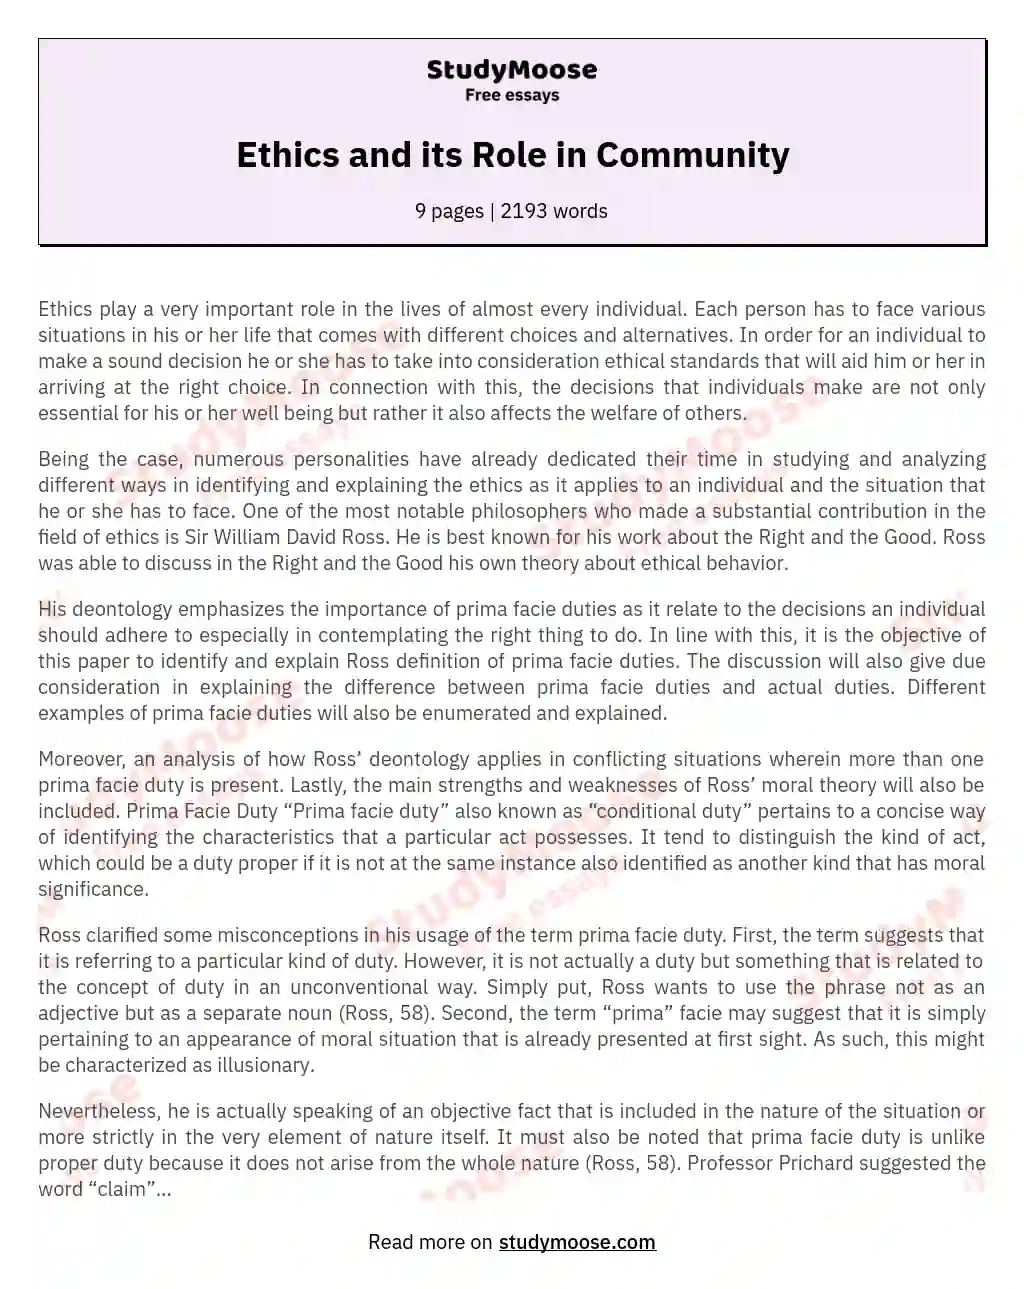 Ethics and its Role in Community essay